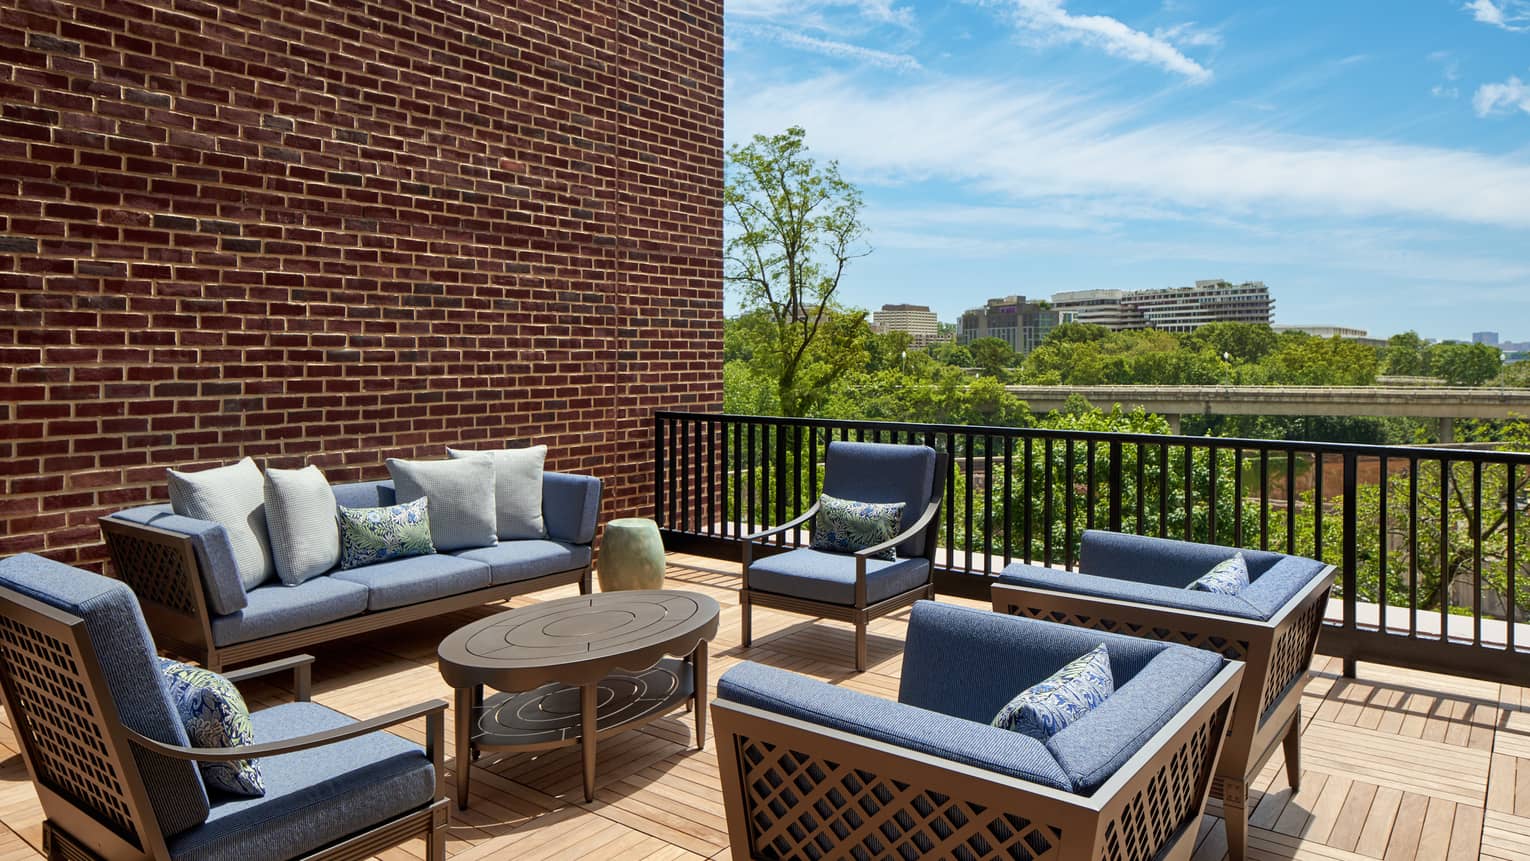 Large outdoor suite terrace with wooden floors and expansive lounge seating featuring dark blue cushions, at Four Seasons Hotel Washington, DC